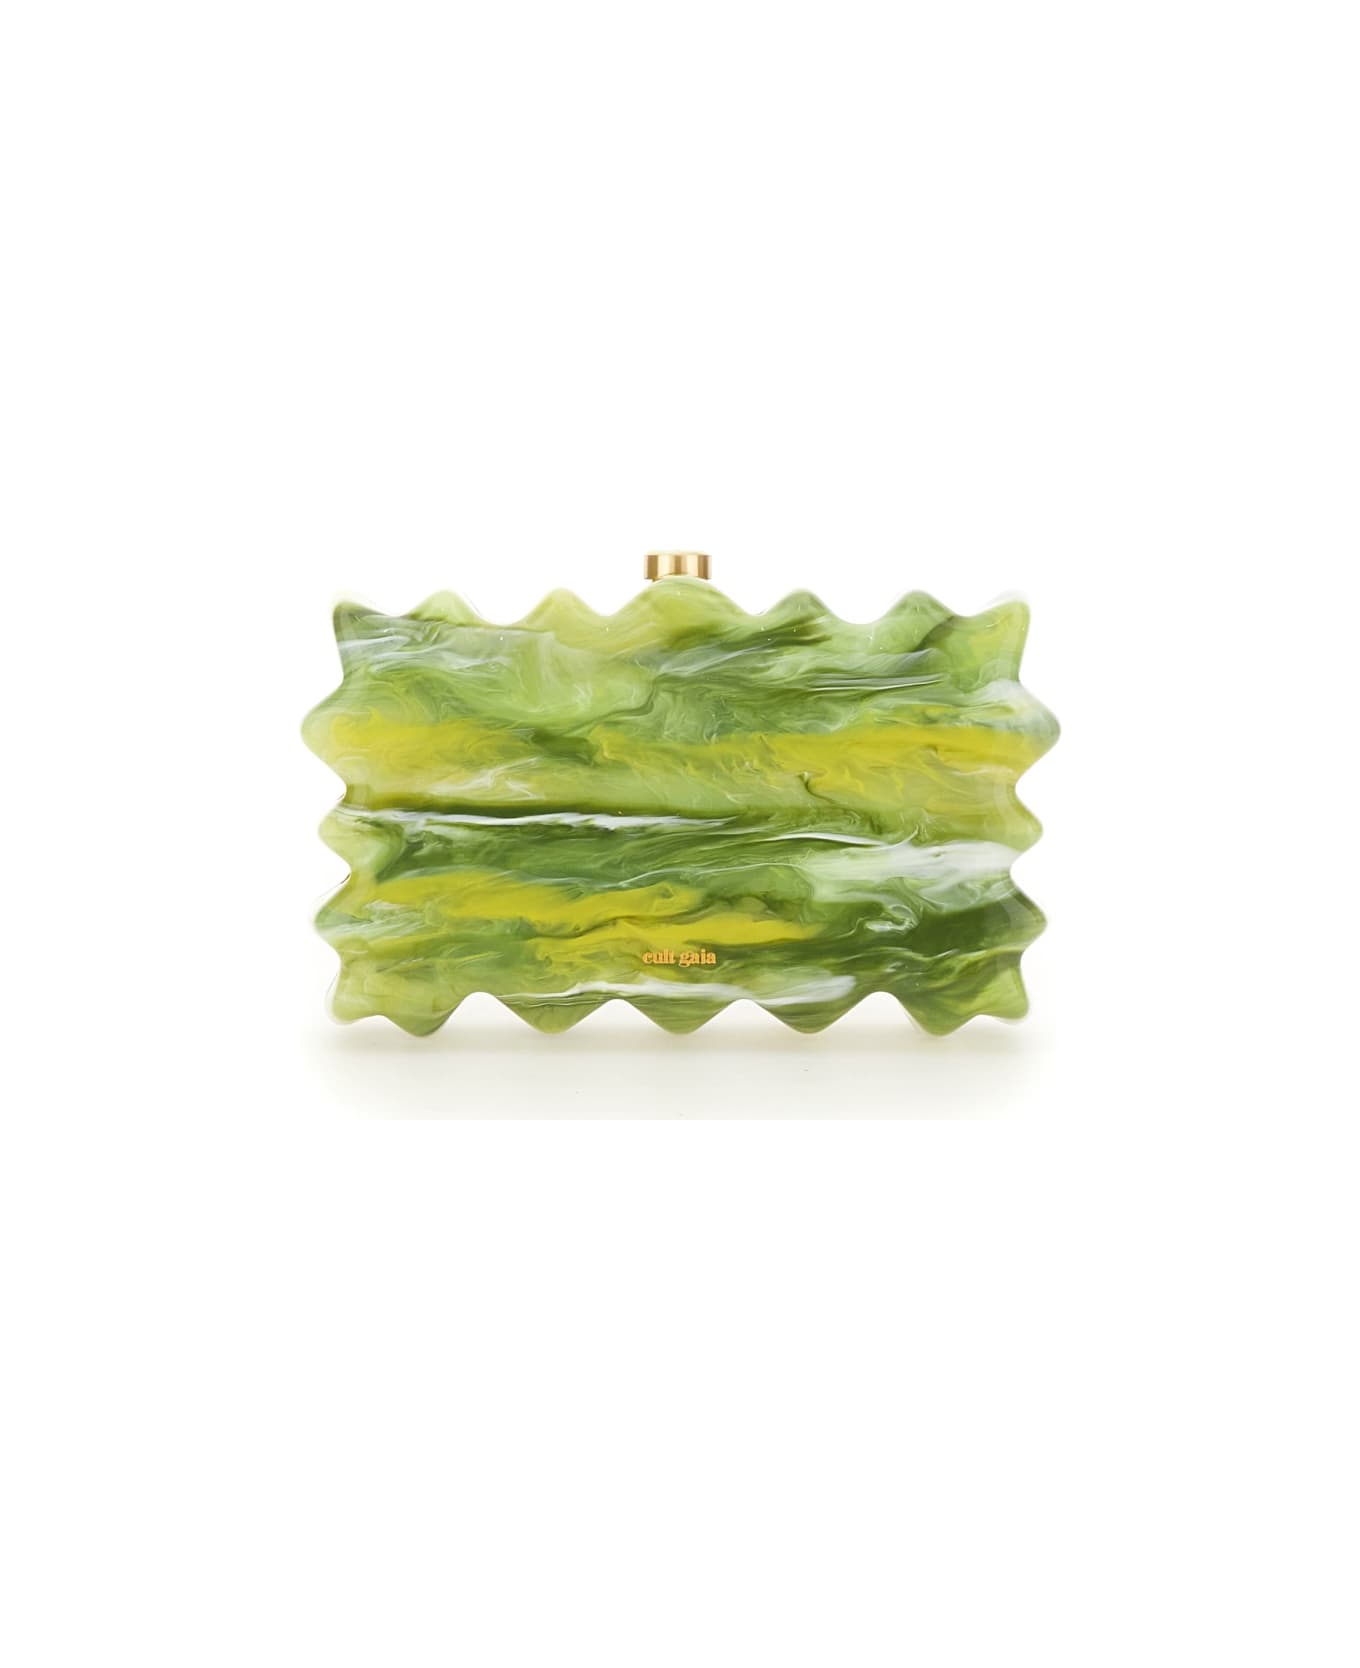 Cult Gaia Clutch "paloma" - GREEN クラッチバッグ